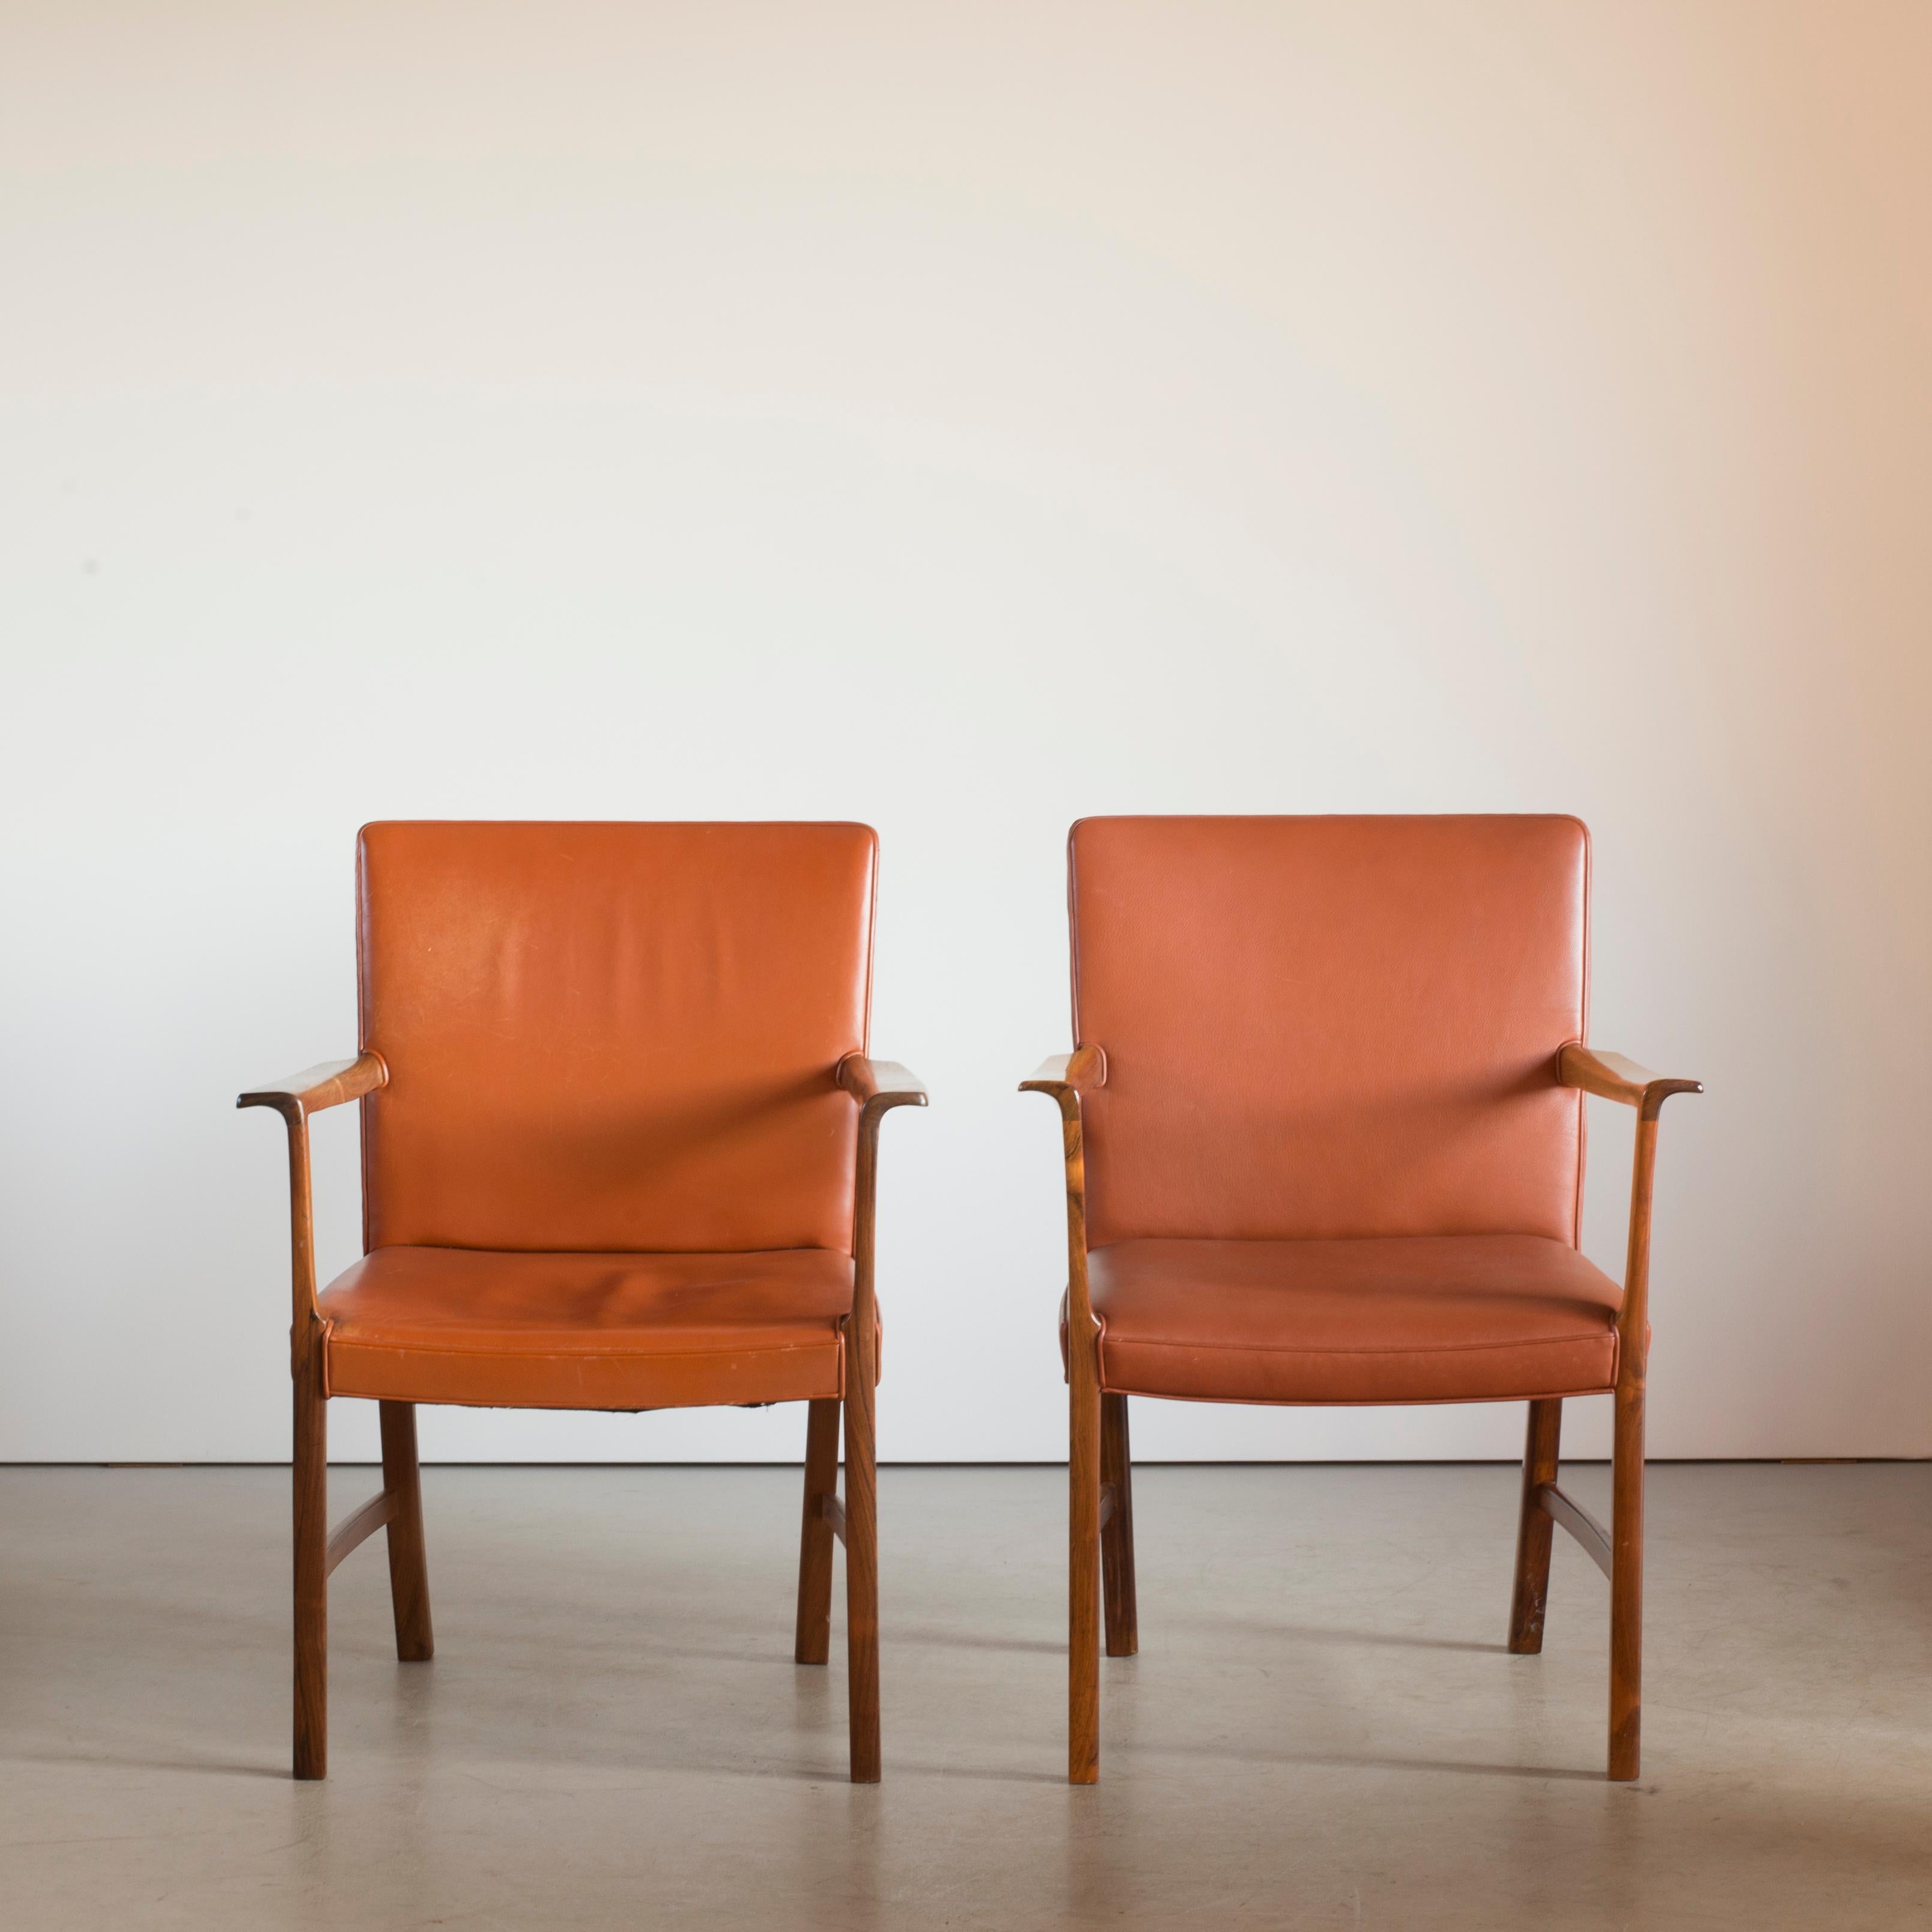 Ole Wanscher two armchairs in rosewood and leather. Executed by A. J. Iversen, Copenhagen, Denmark.